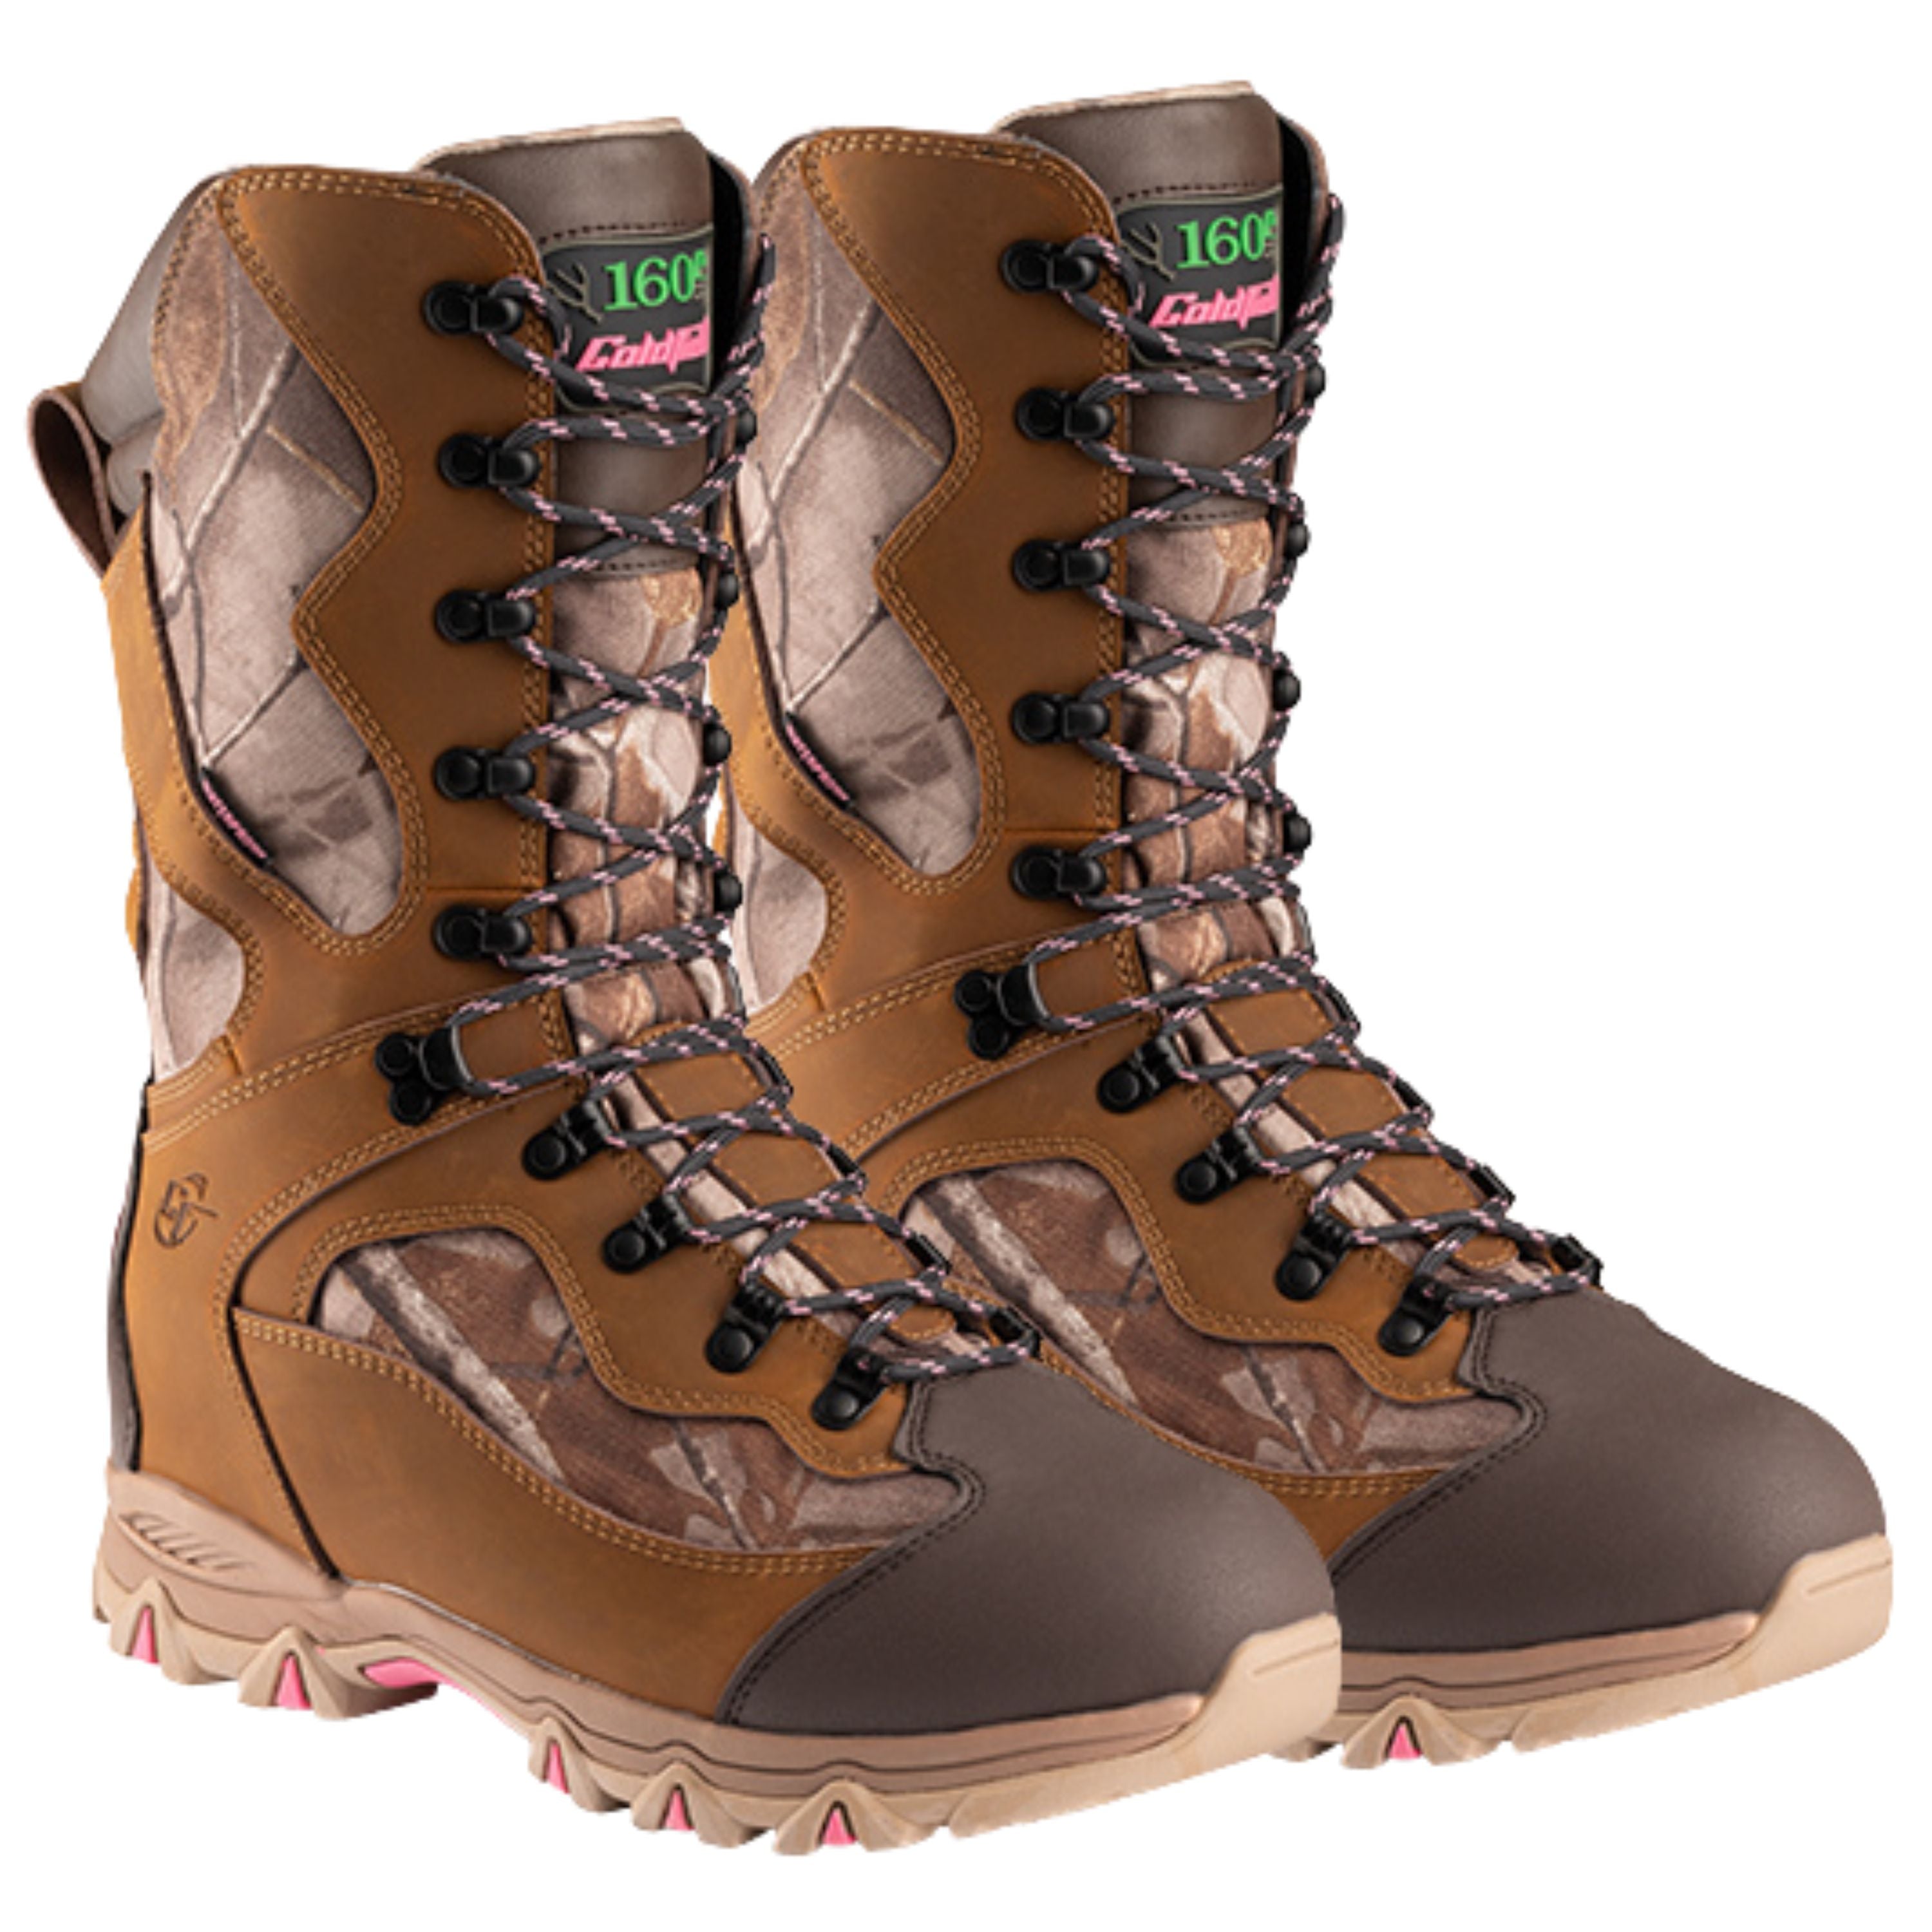 Bottes "Grizzly" - Femme